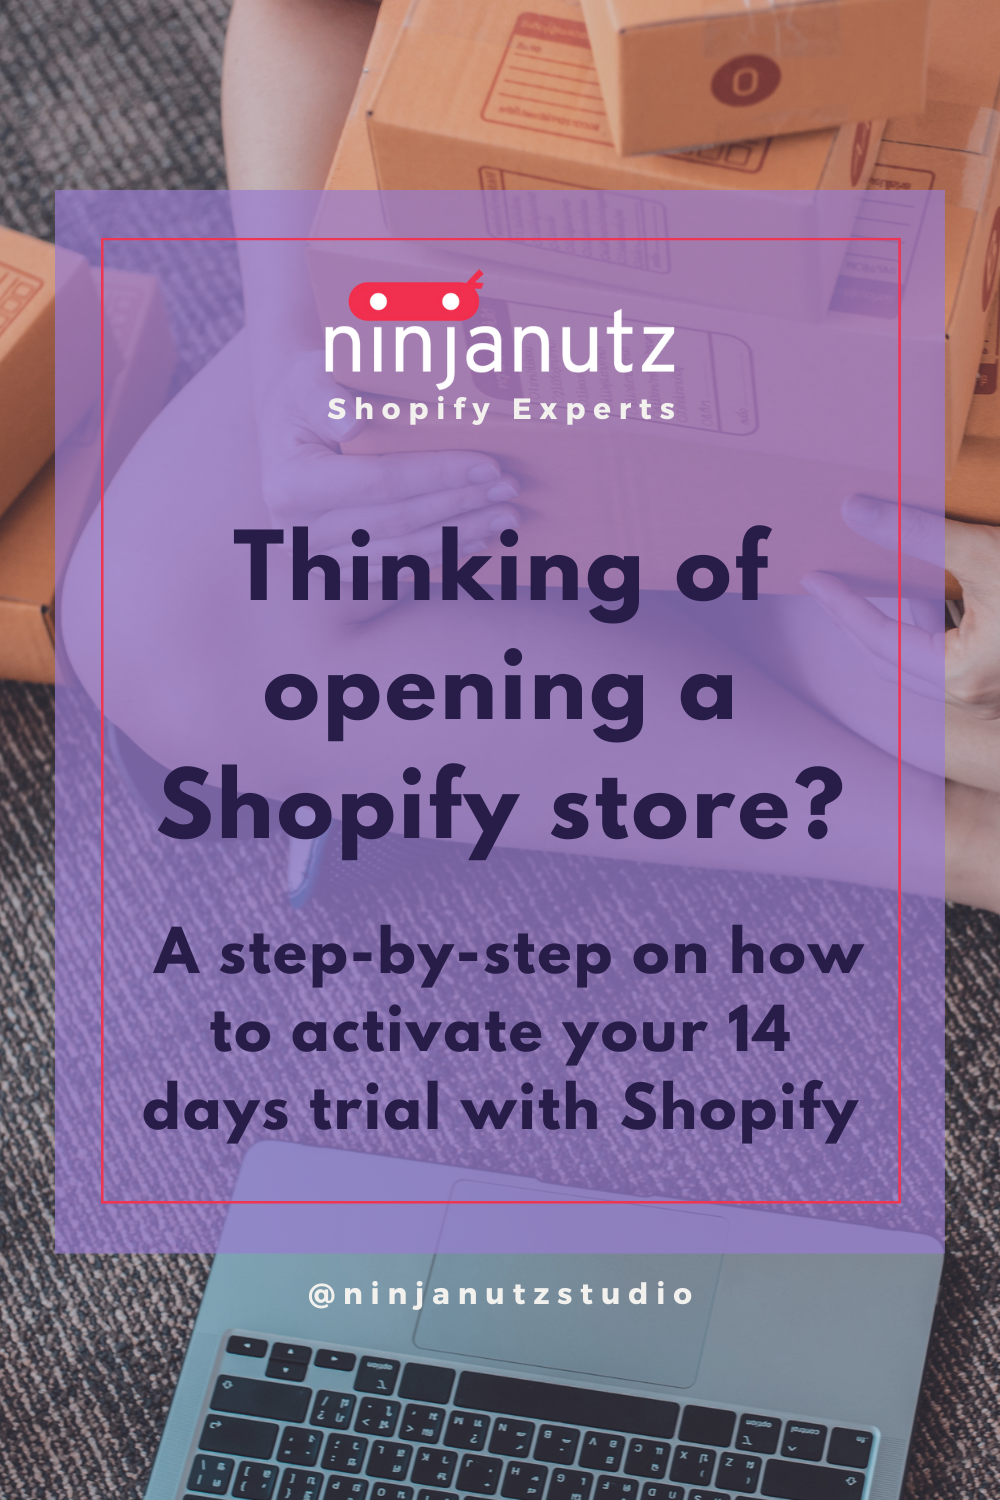 Thinking of opening a Shopify store? A step-by-step on how to activate your 14 days trial with Shopify NinjaNutz®